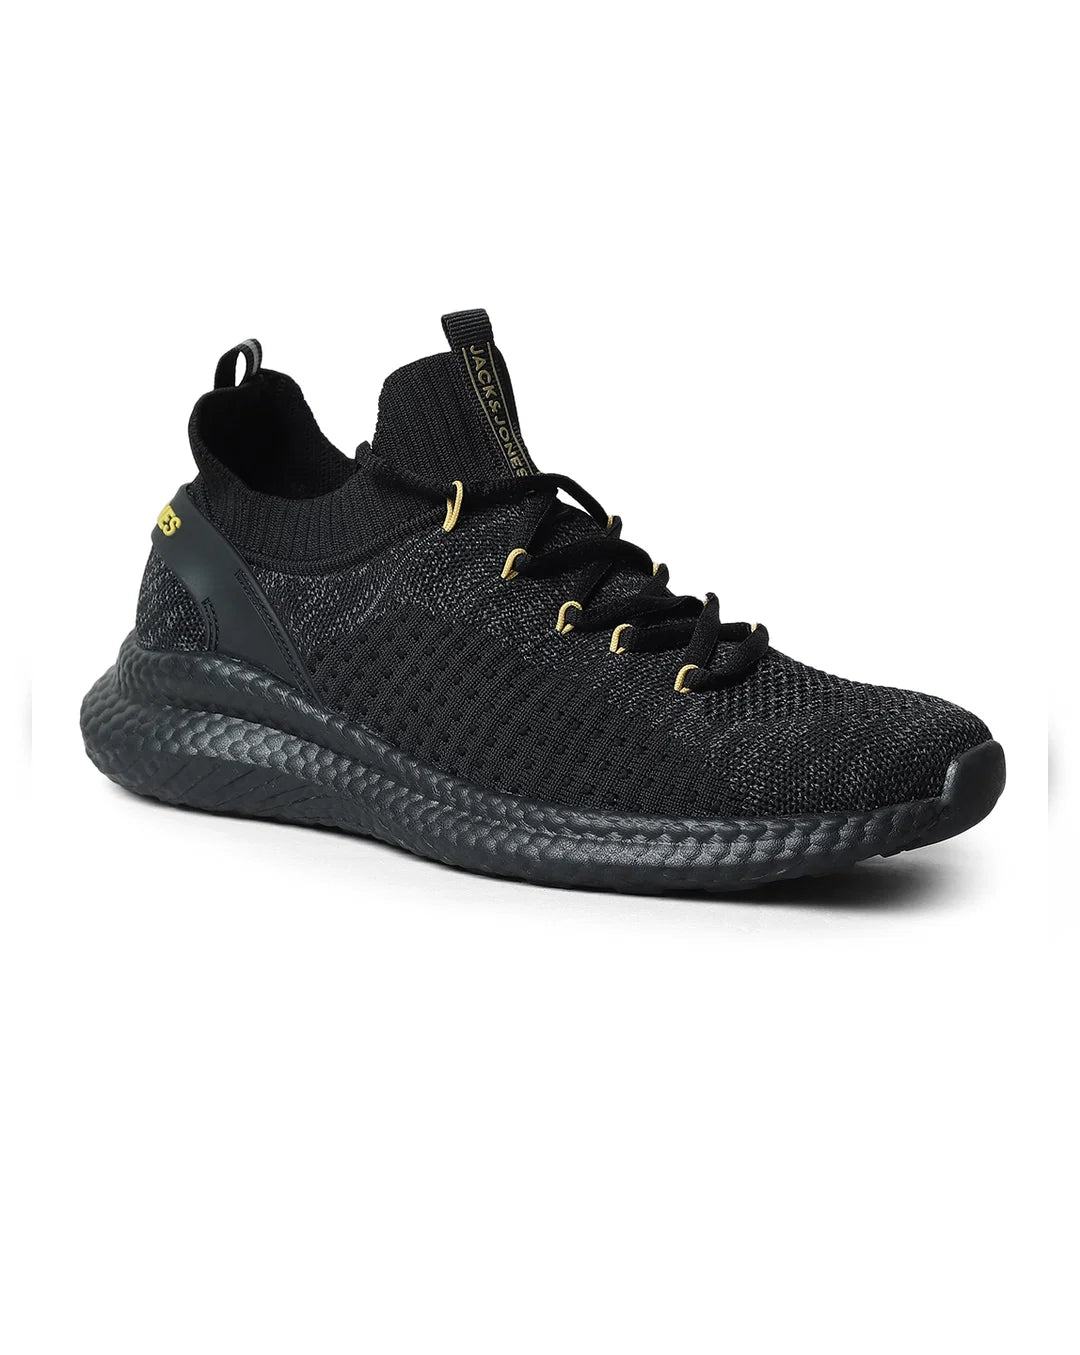 JJ BLACK MID-TOP LACE-UP SNEAKERS